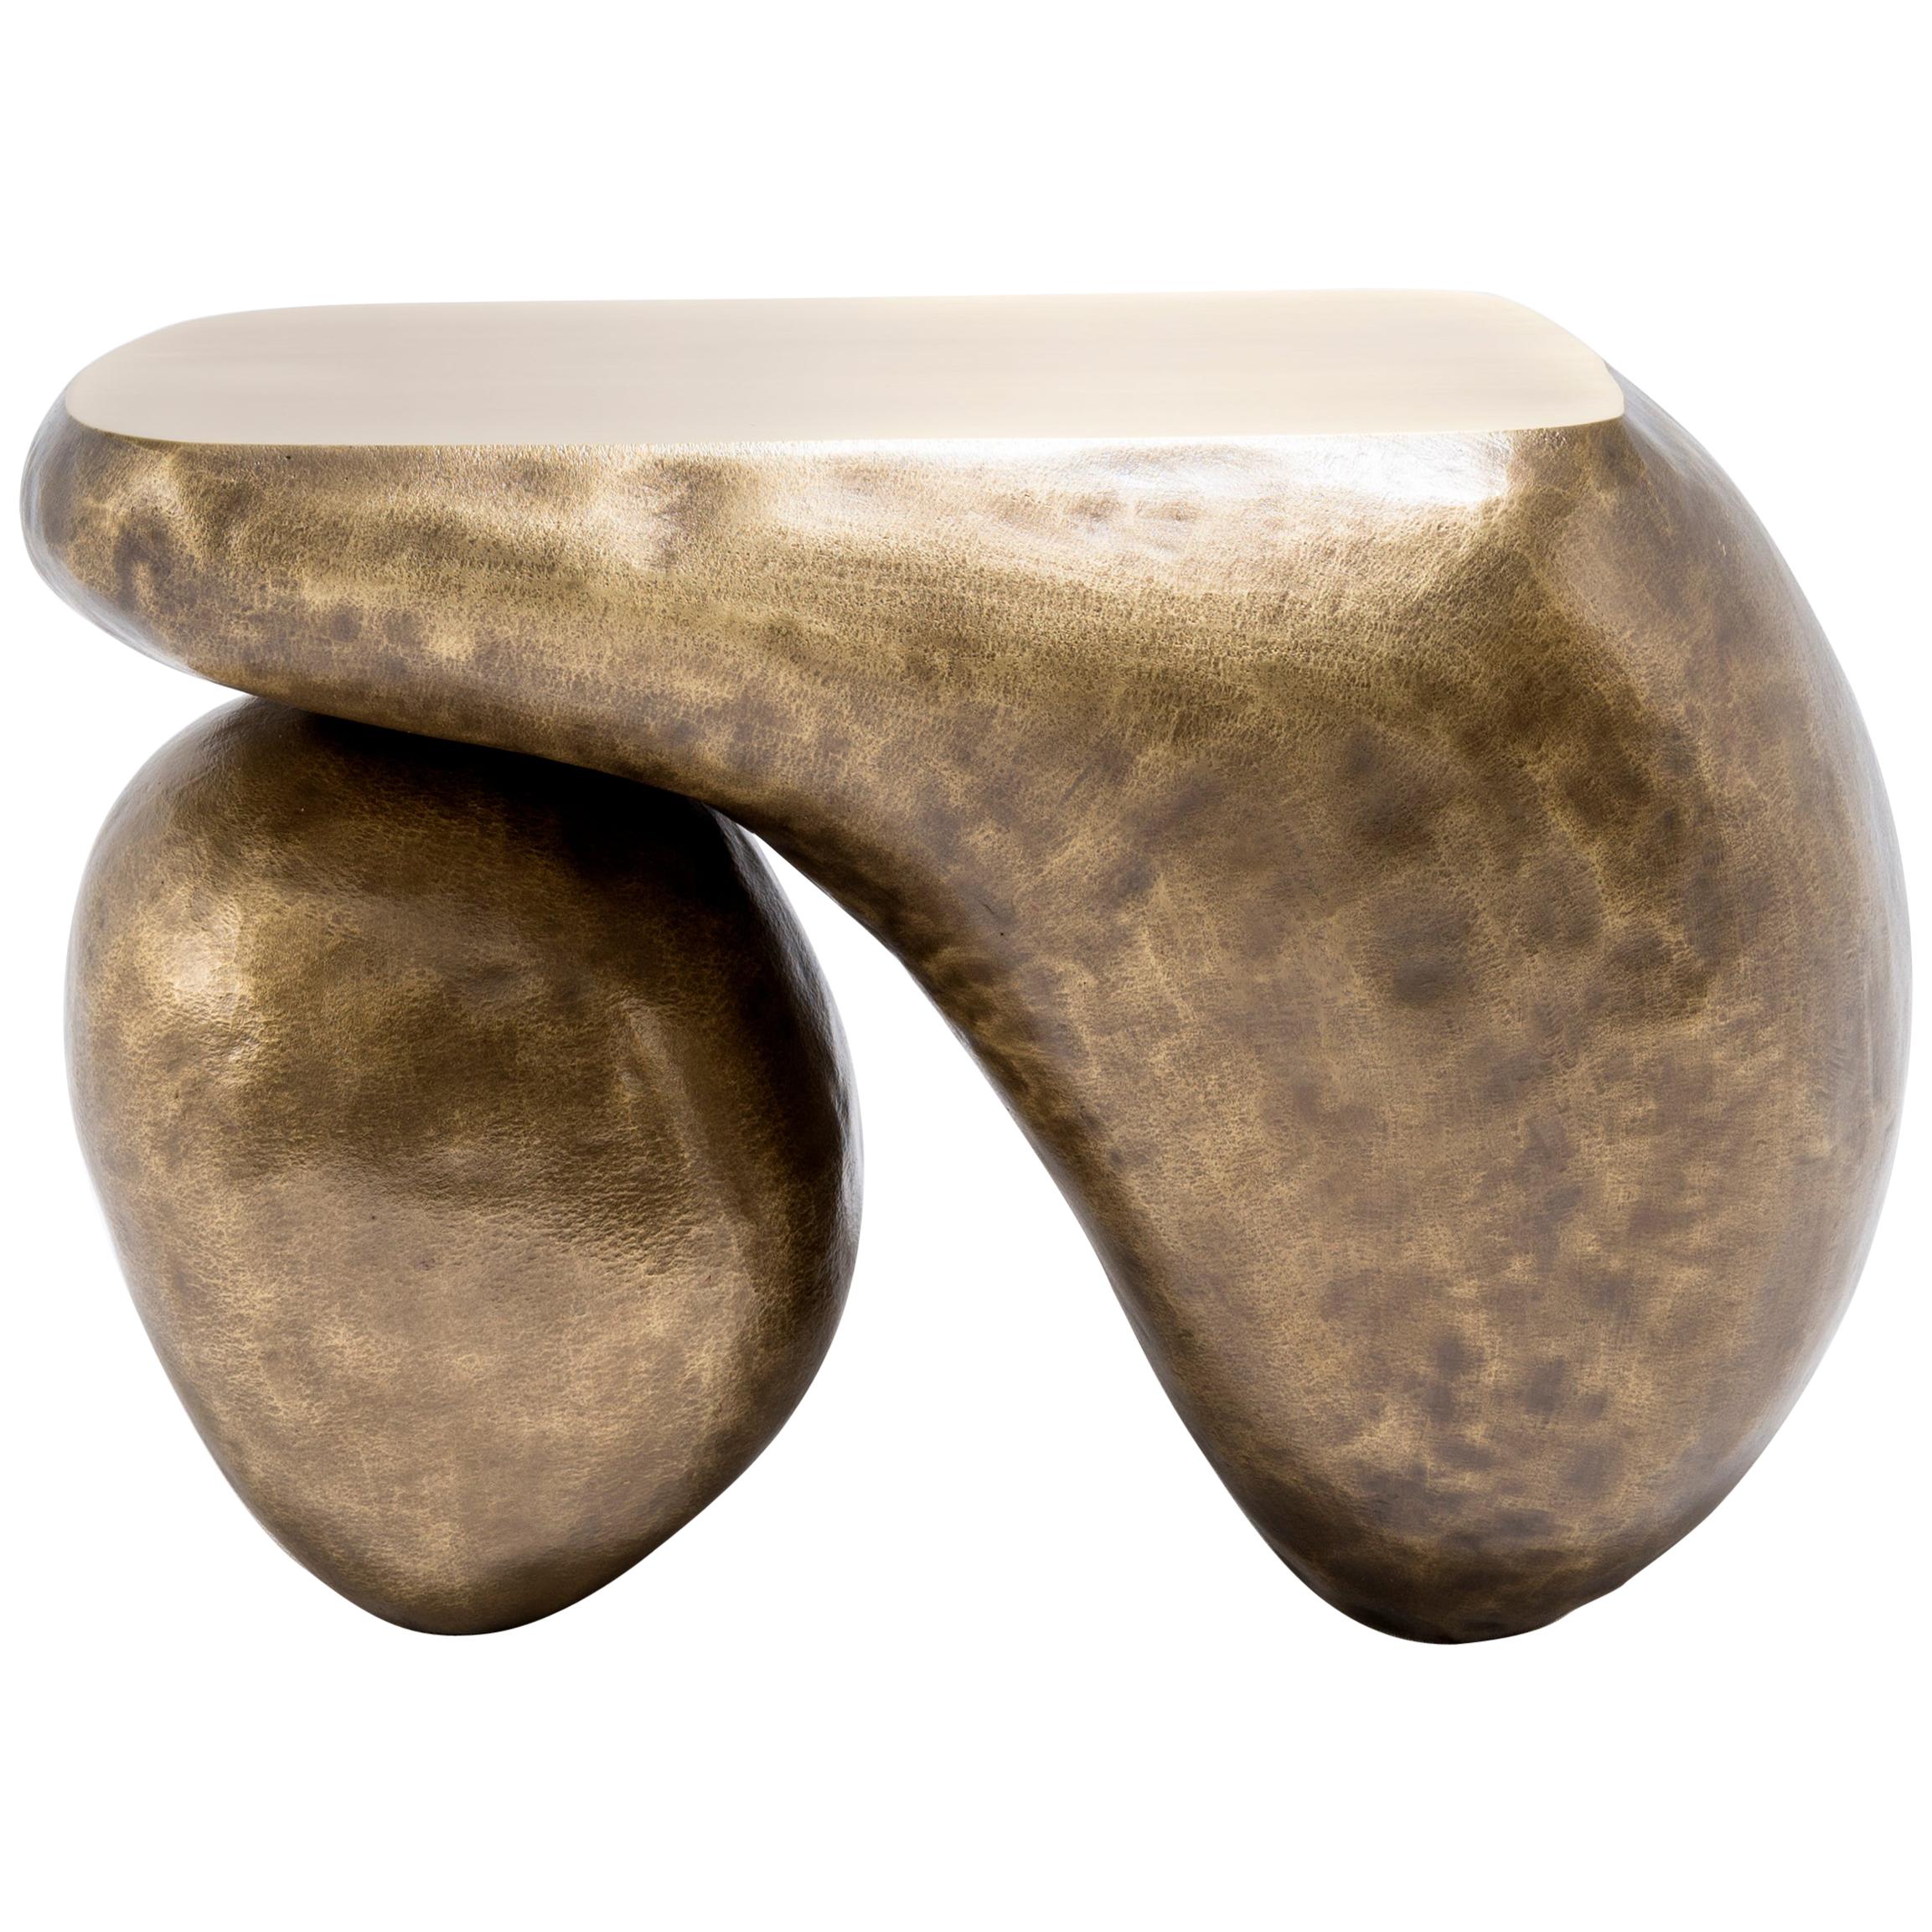 Limited Edition "Duo" Brass Side Table by Mauro Mori - Italy, 2019